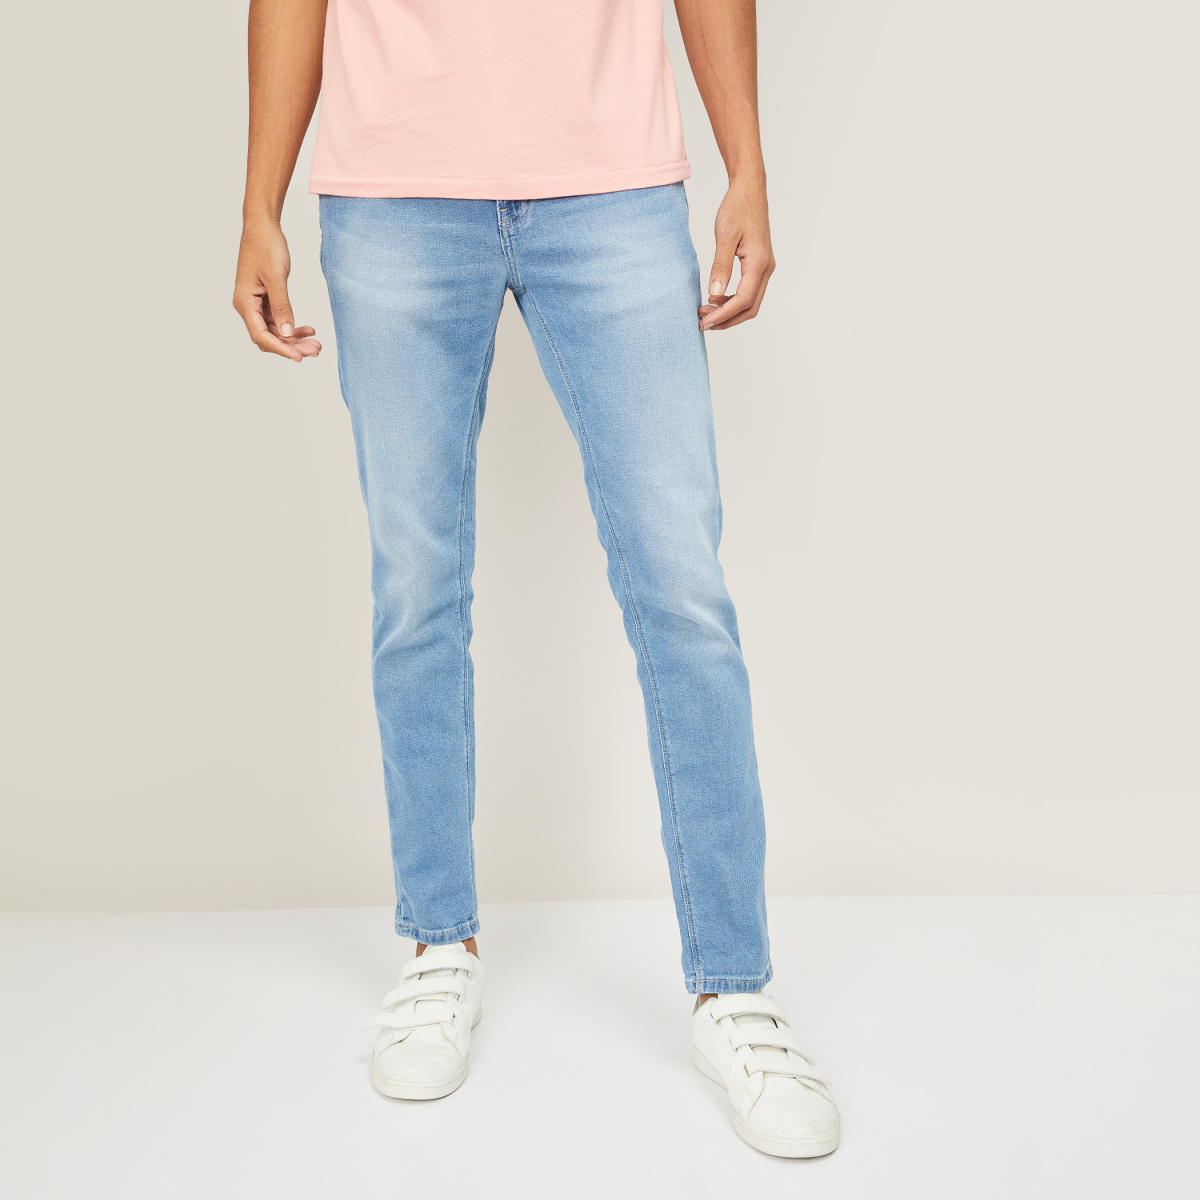 UNITED COLORS OF BENETTON Men Stonewashed Skinny Fit Jeans